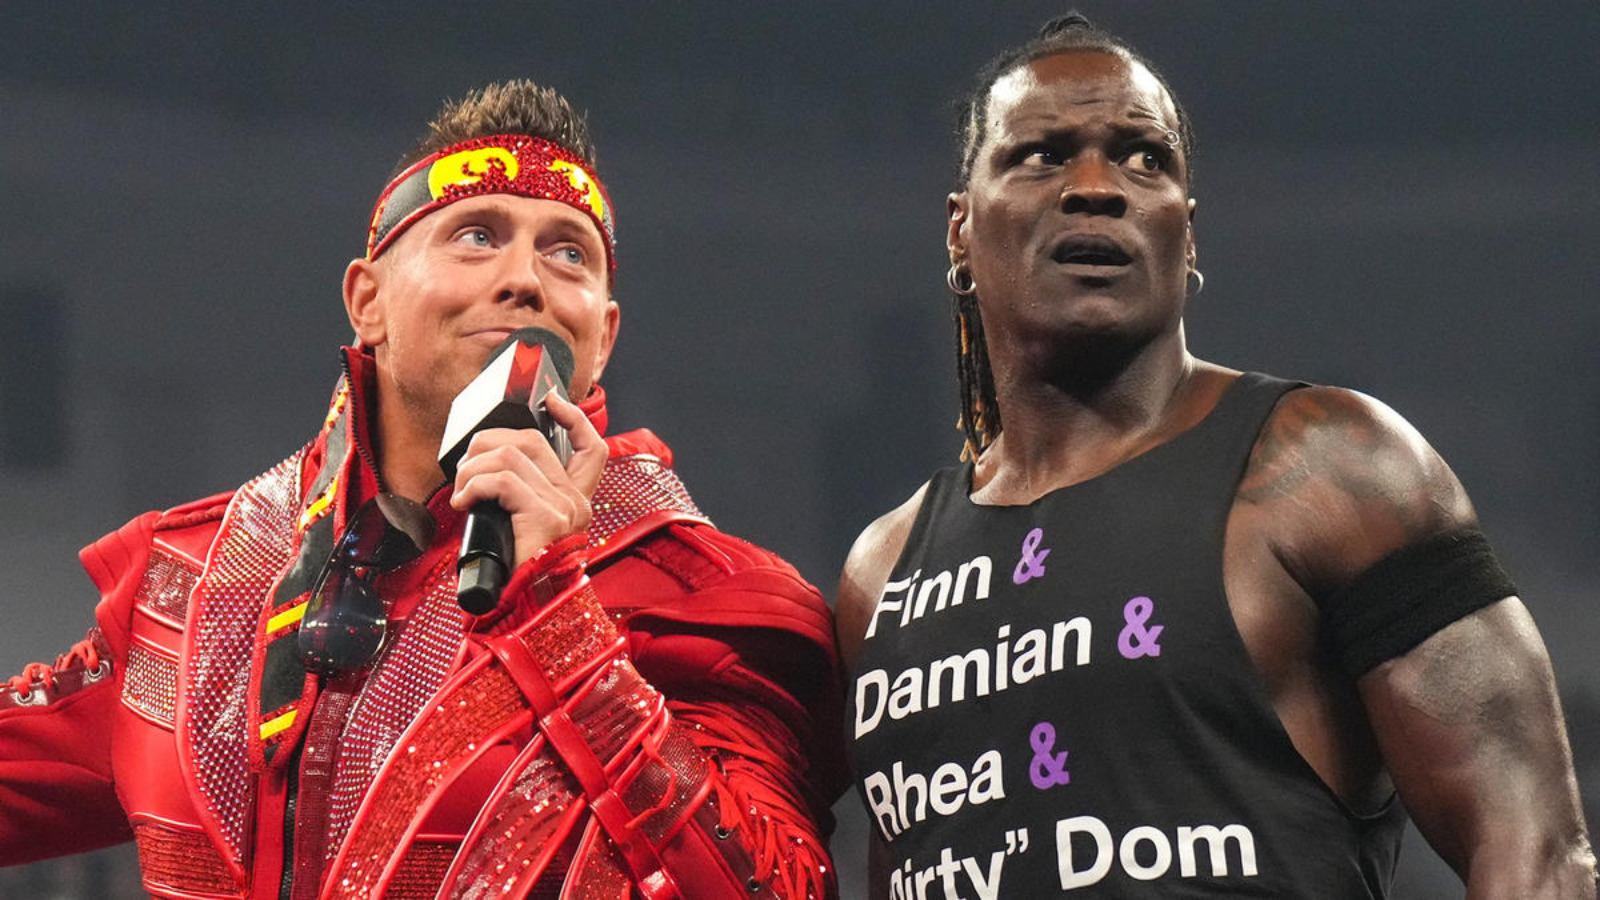 R-Truth Opens Up About 'Running It Back' With The Miz In WWE